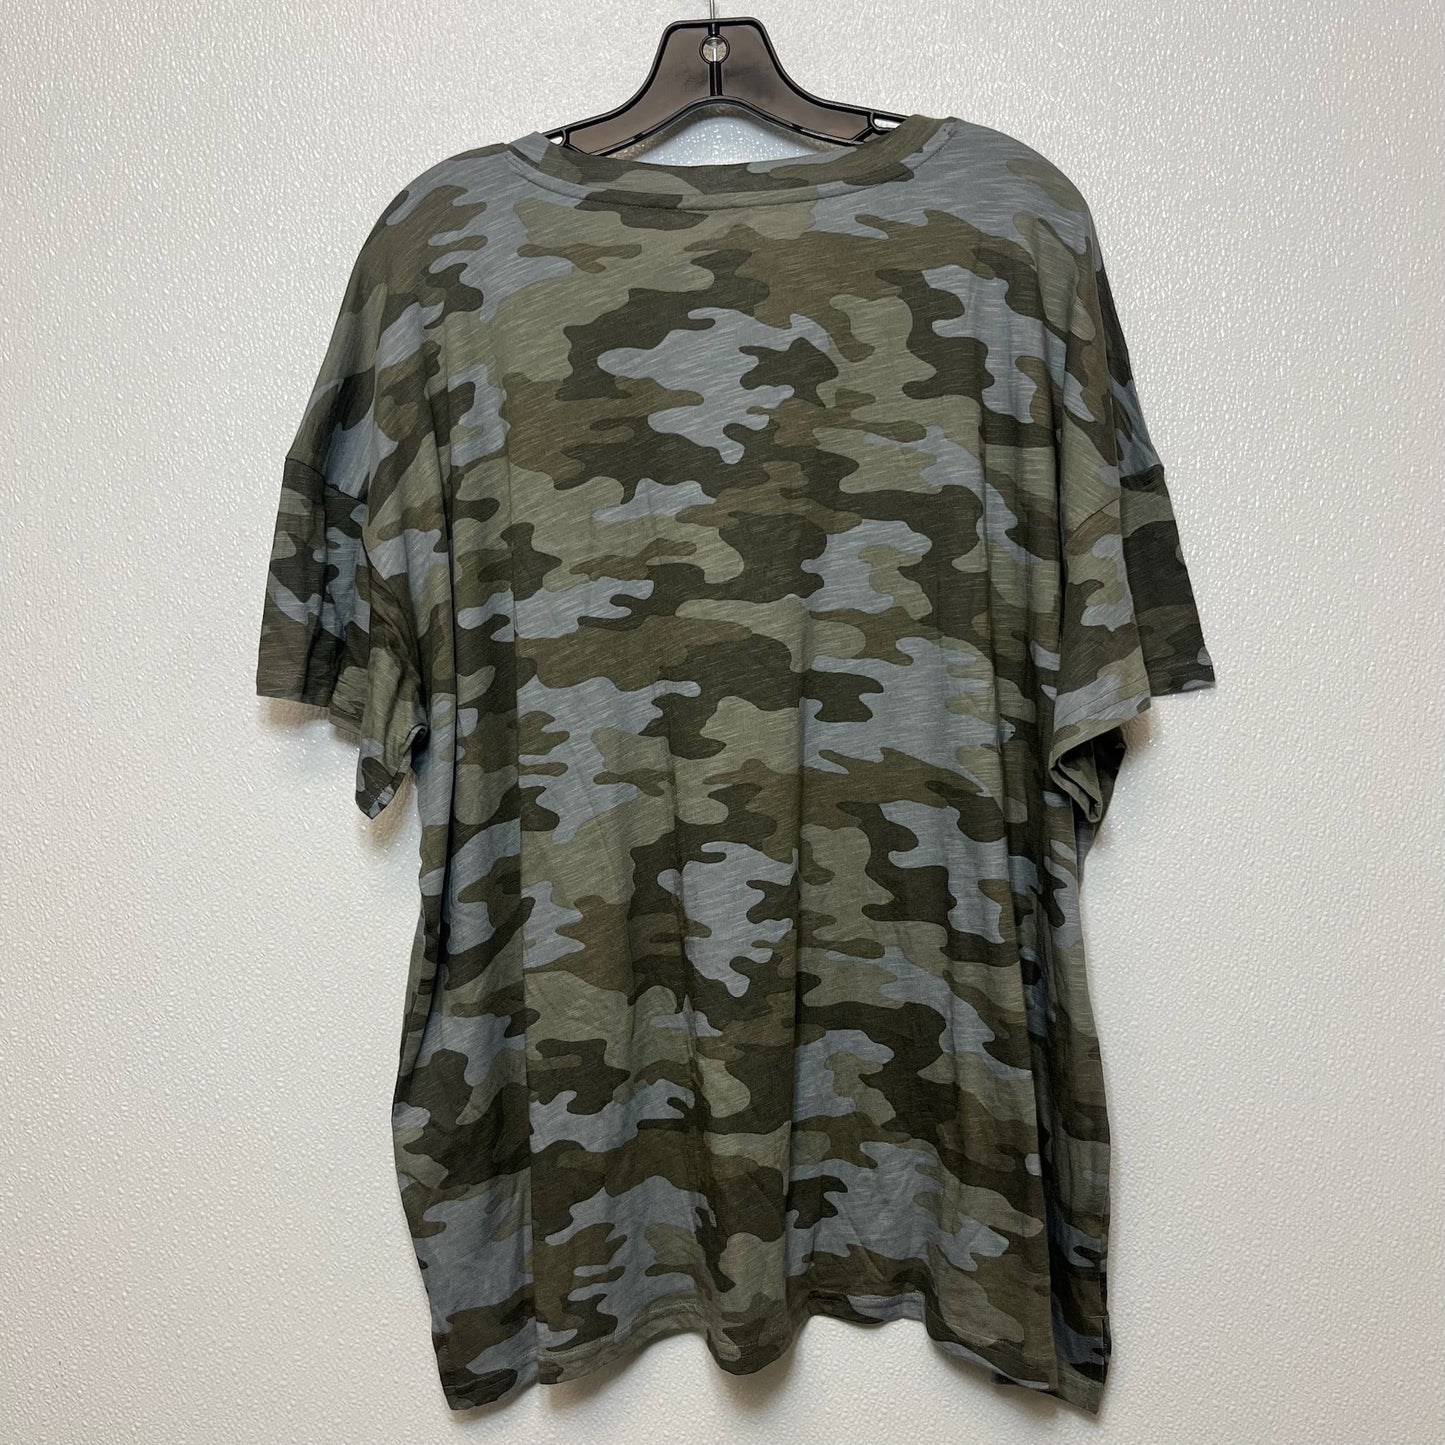 Camoflauge Top Short Sleeve Maurices, Size 2x